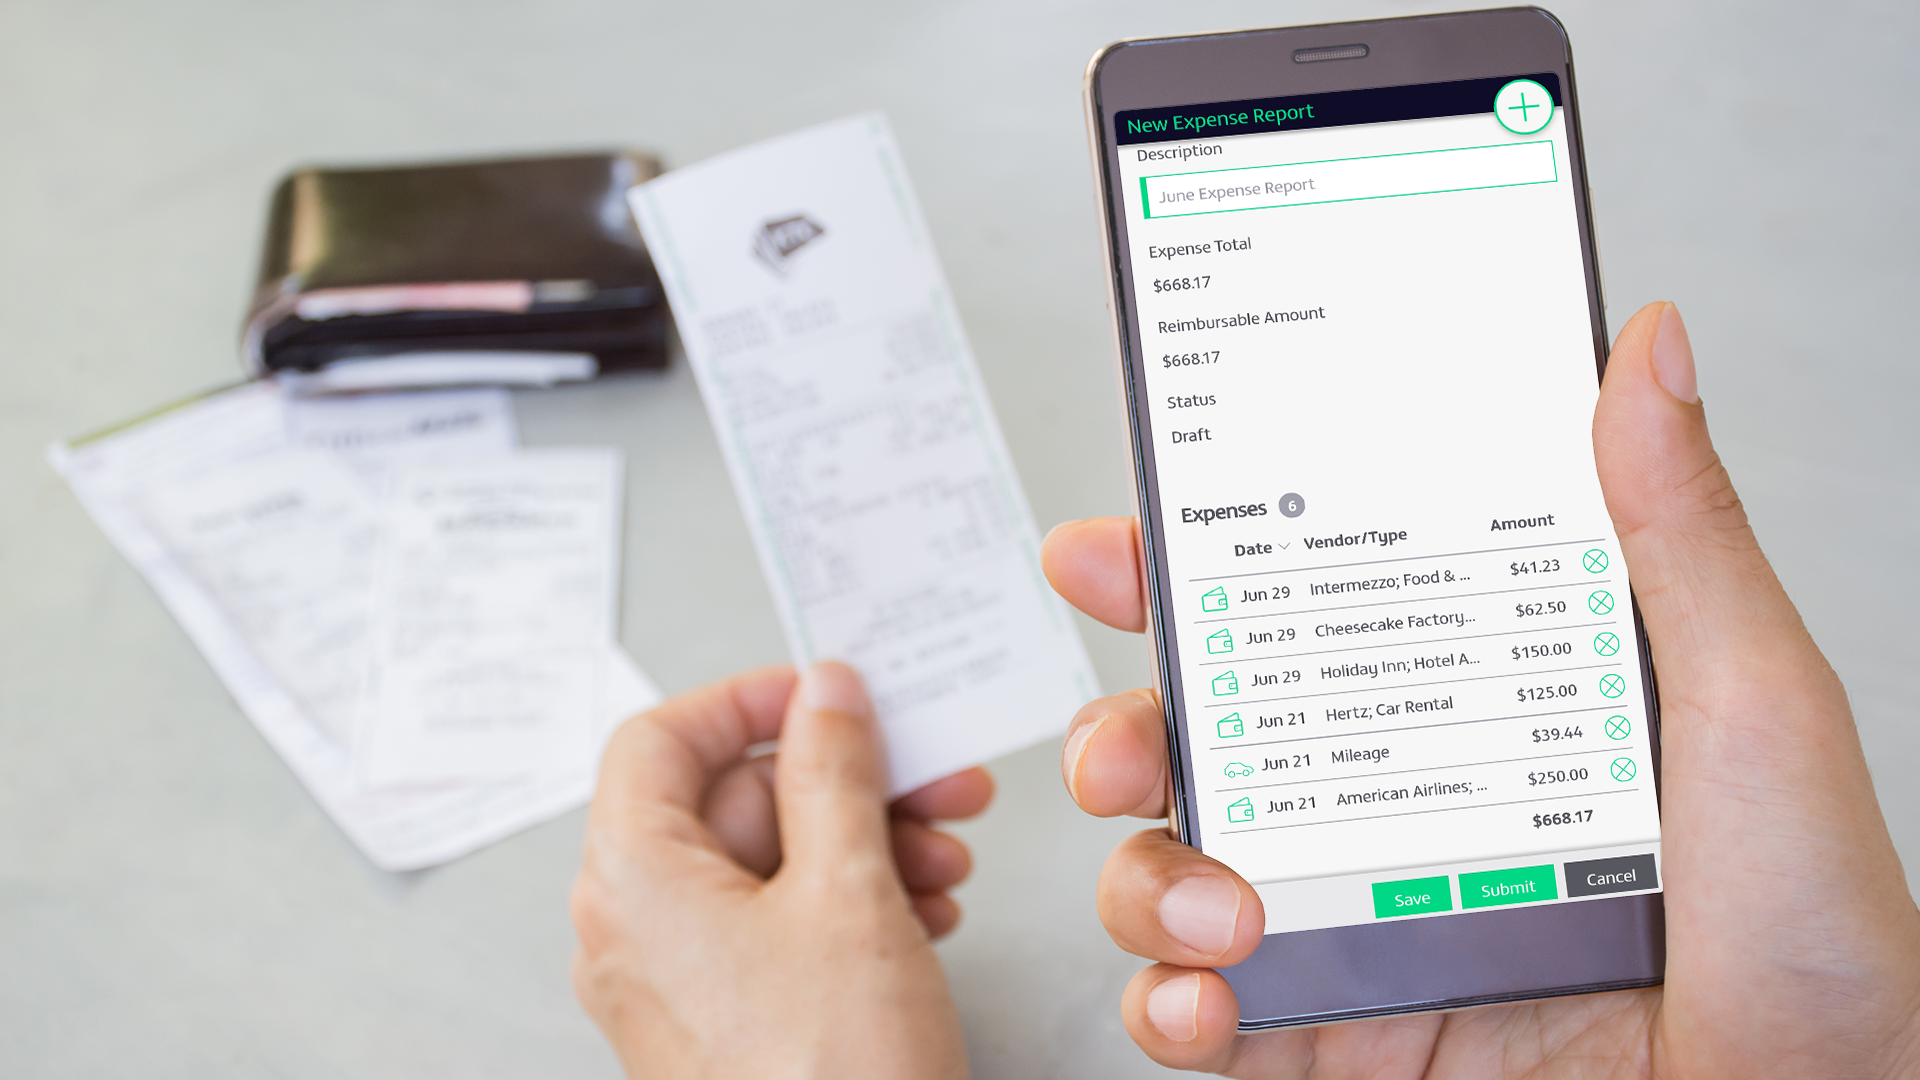 Submit: Gather your expenses for reimbursement and those on your corporate credit card, and submit as an expense report for approval: it couldn’t be easier